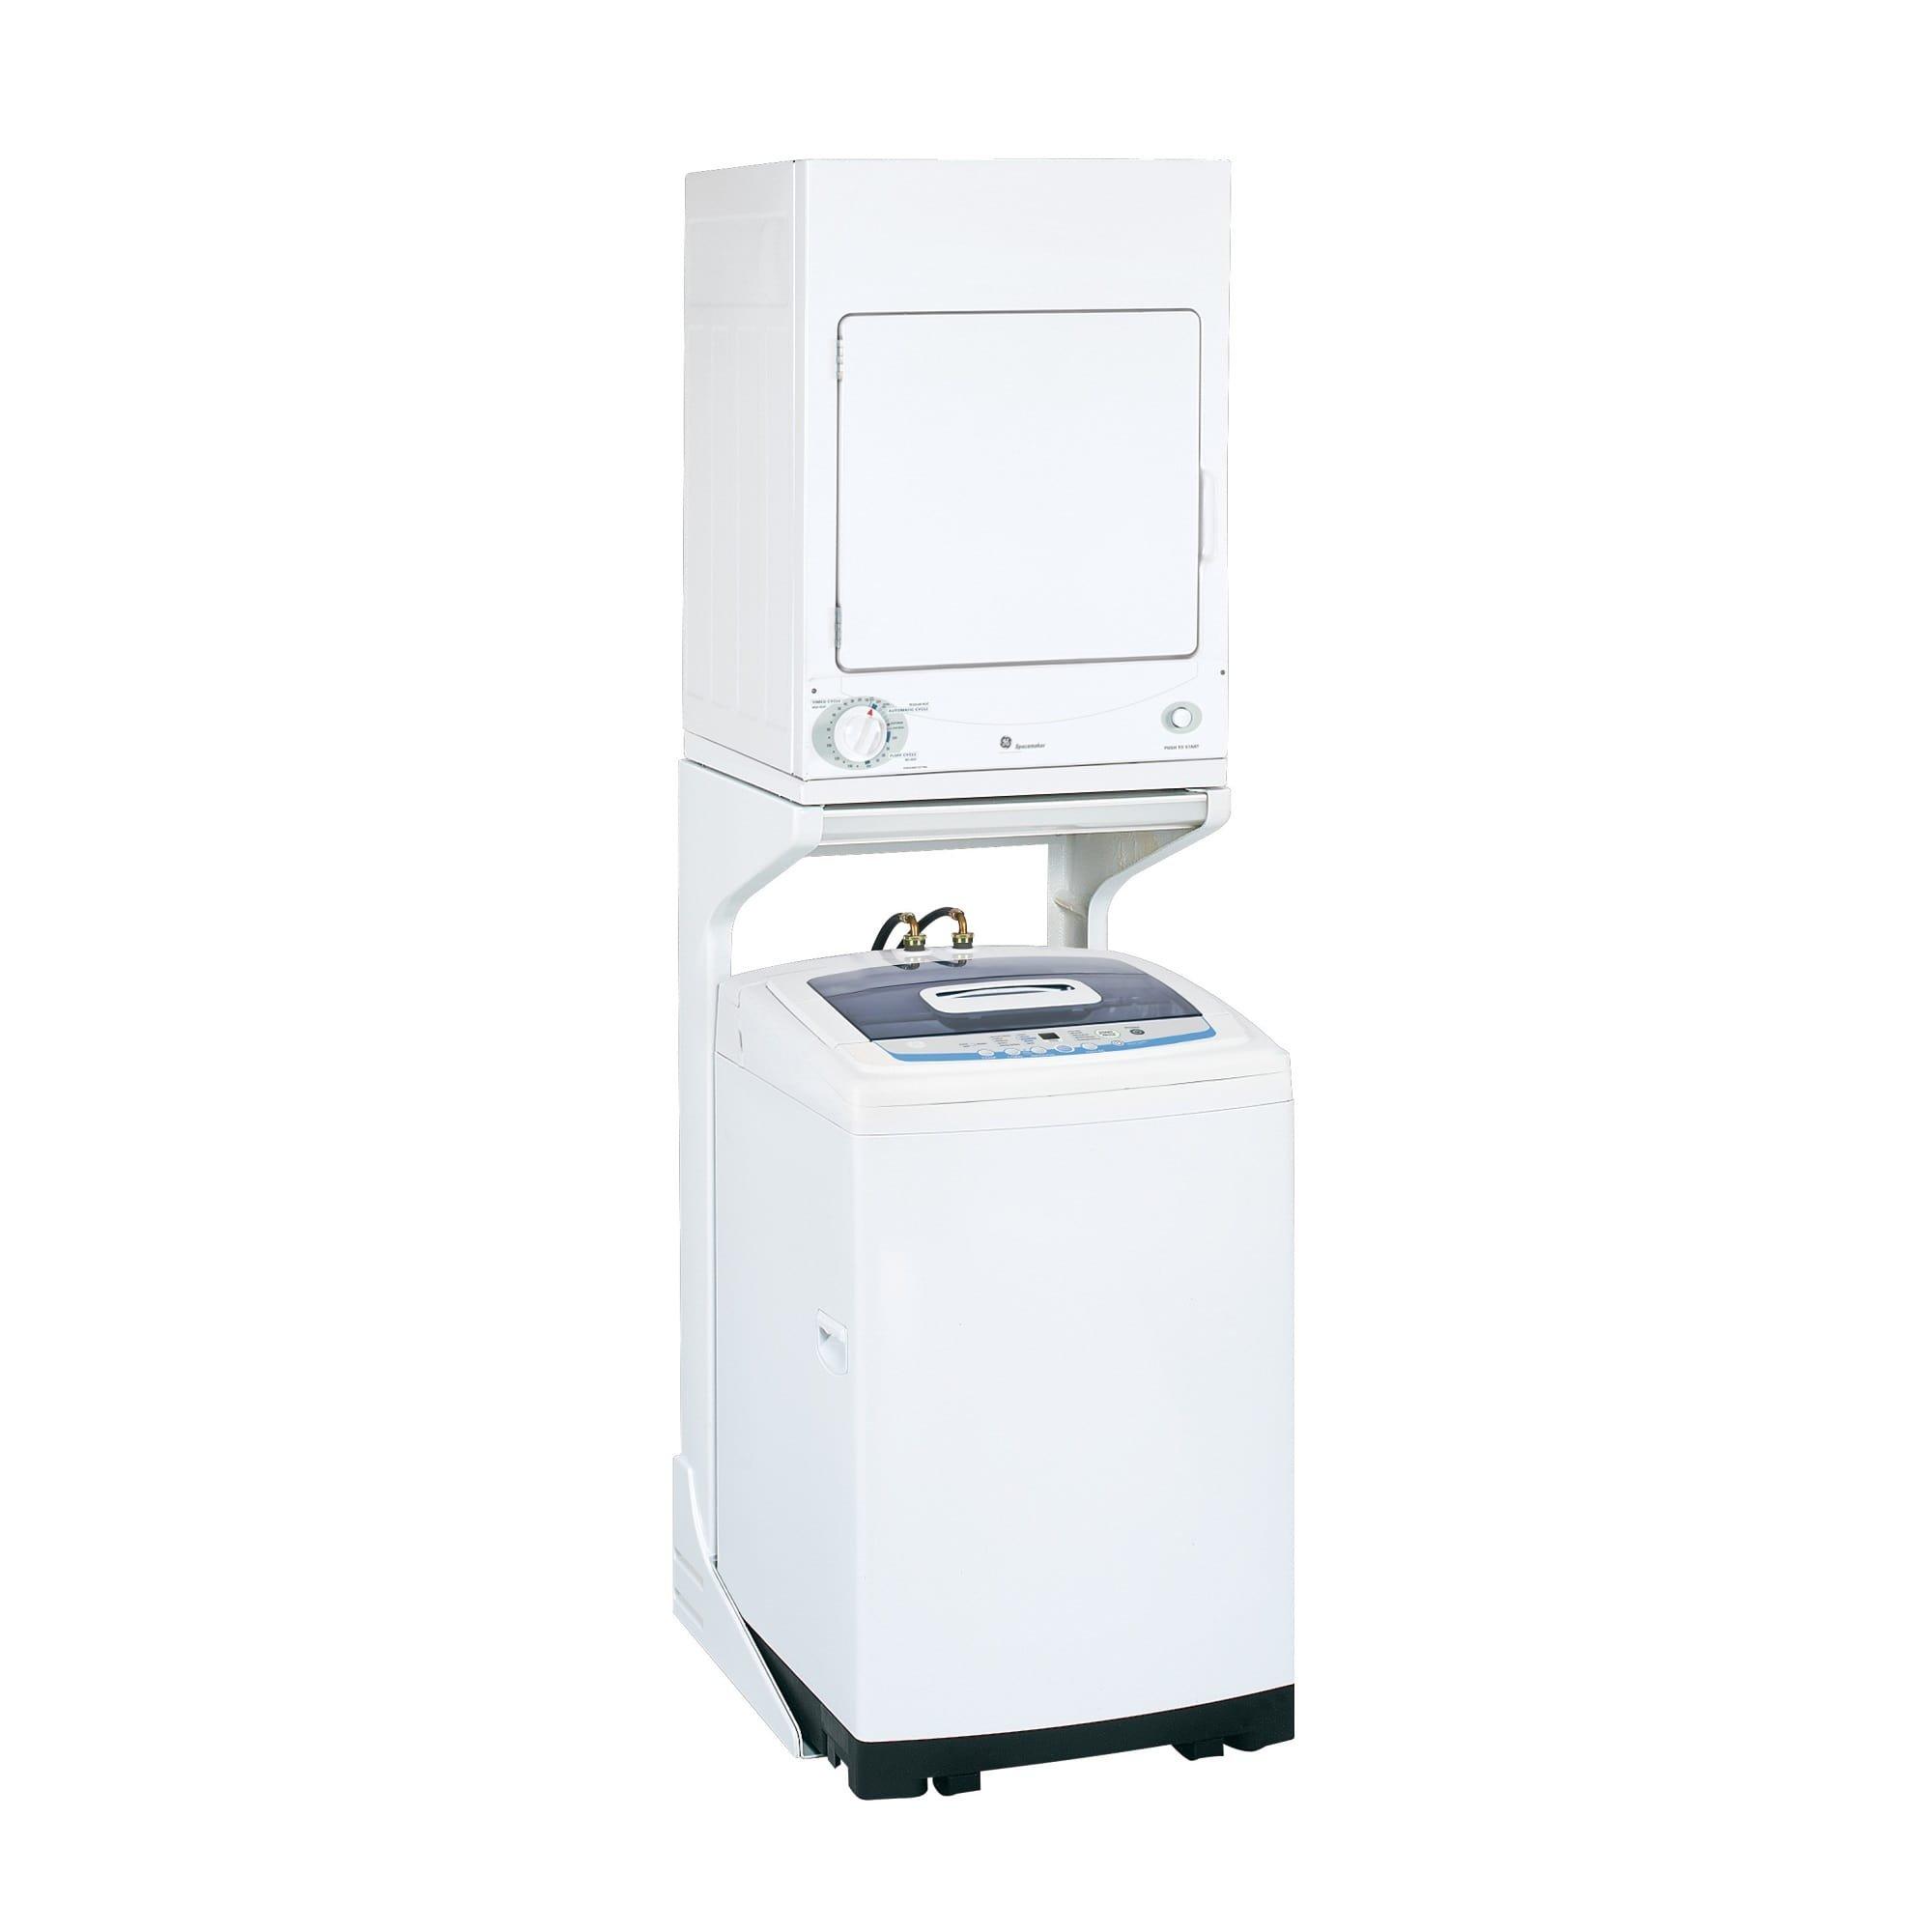 https://i8.amplience.net/i/aarons/G100248_51/Space%20Saving%203.0%20cu.%20ft.%20Top%20Load%20Washer%20&%203.6%20cu.%20ft.%20120%20Volt%20Electric%20Portable%20Compact%20Dryer?$large$